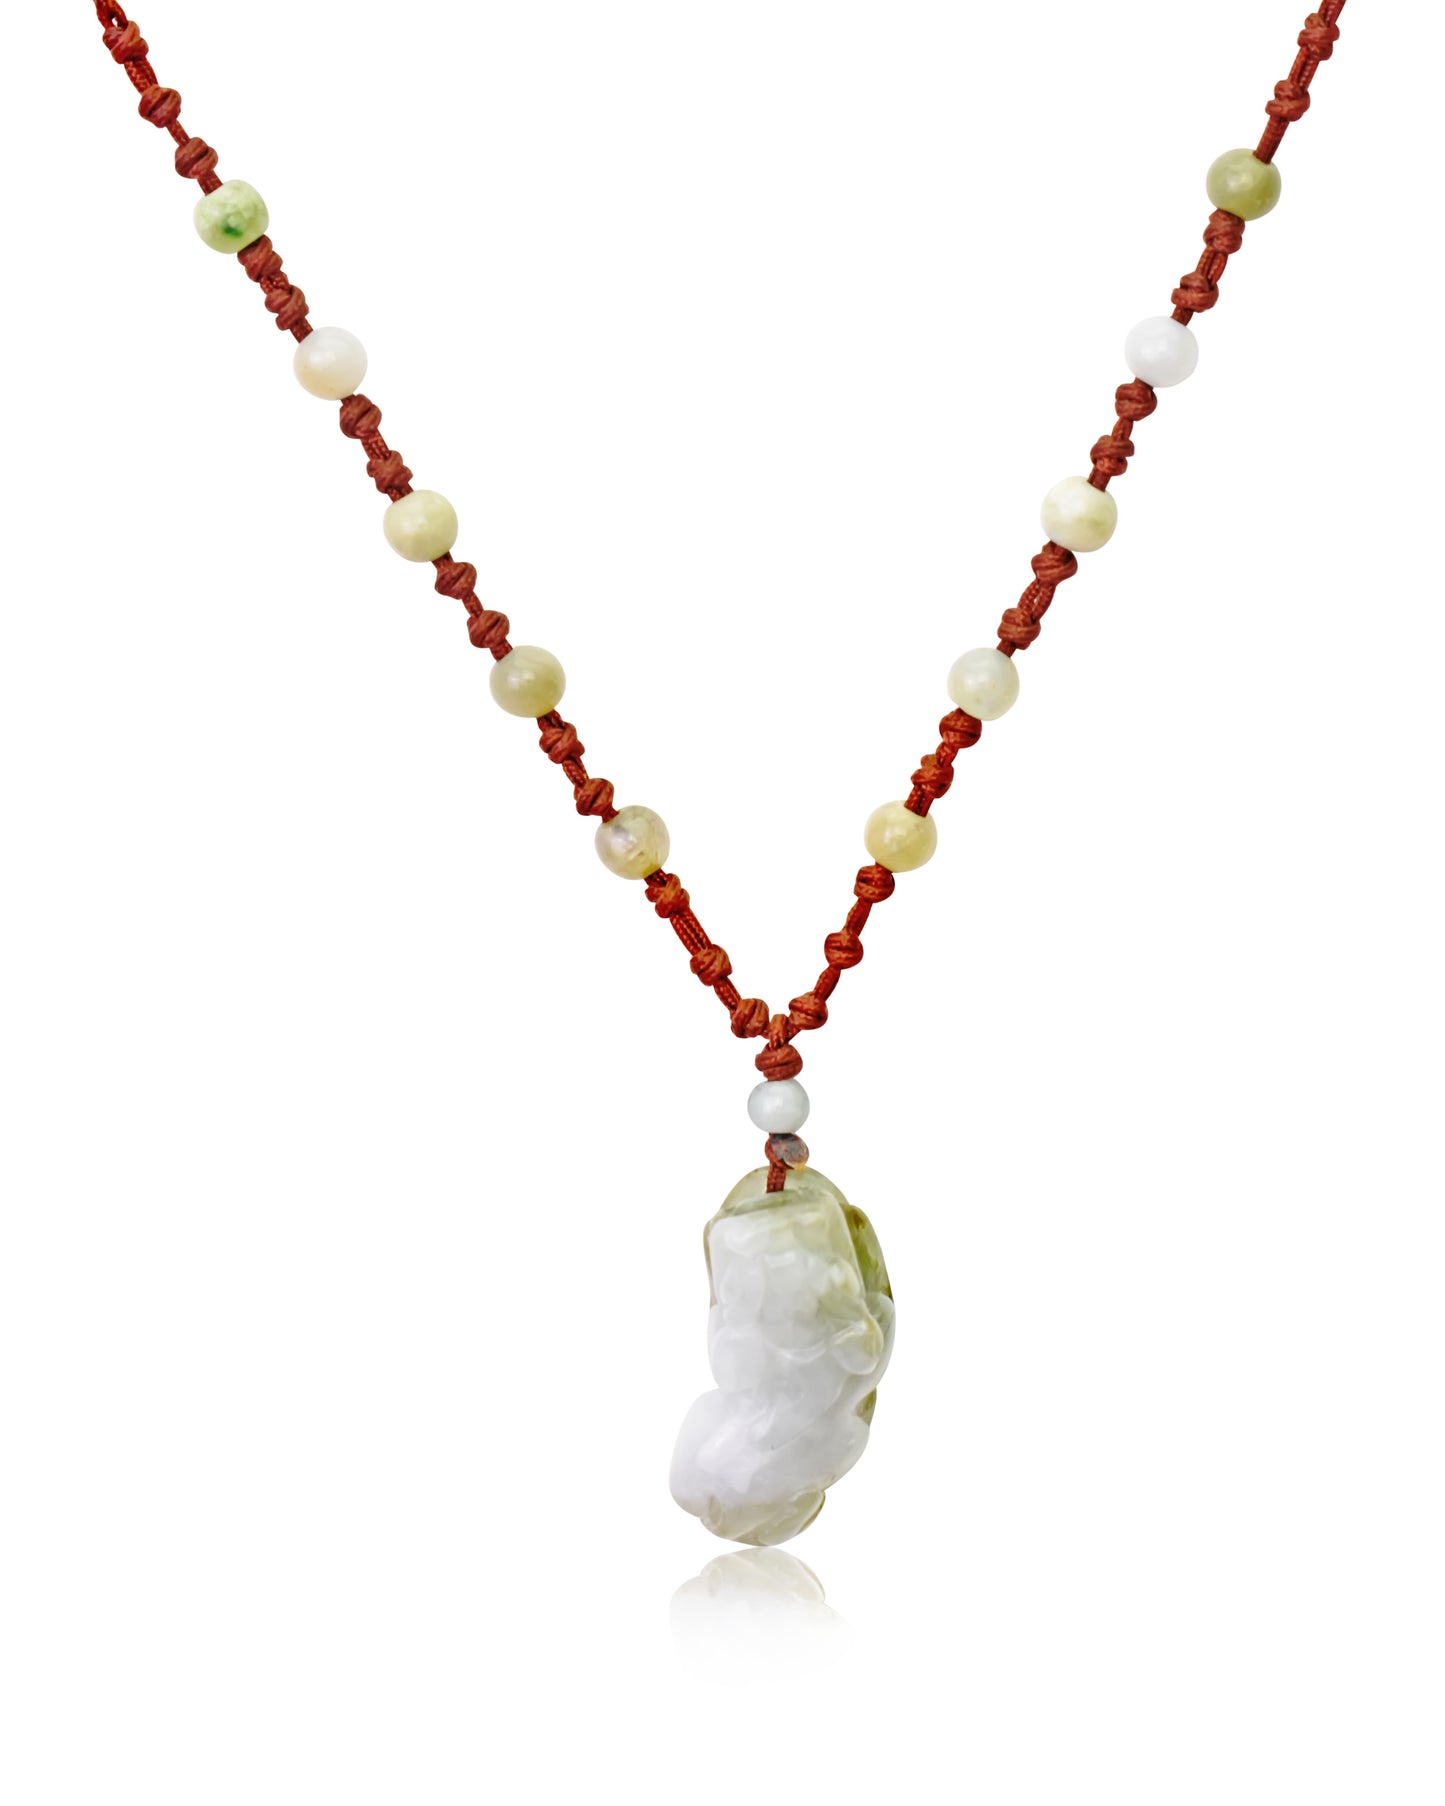 The Jade Necklace of Wealth and Fortune: Pi Yao